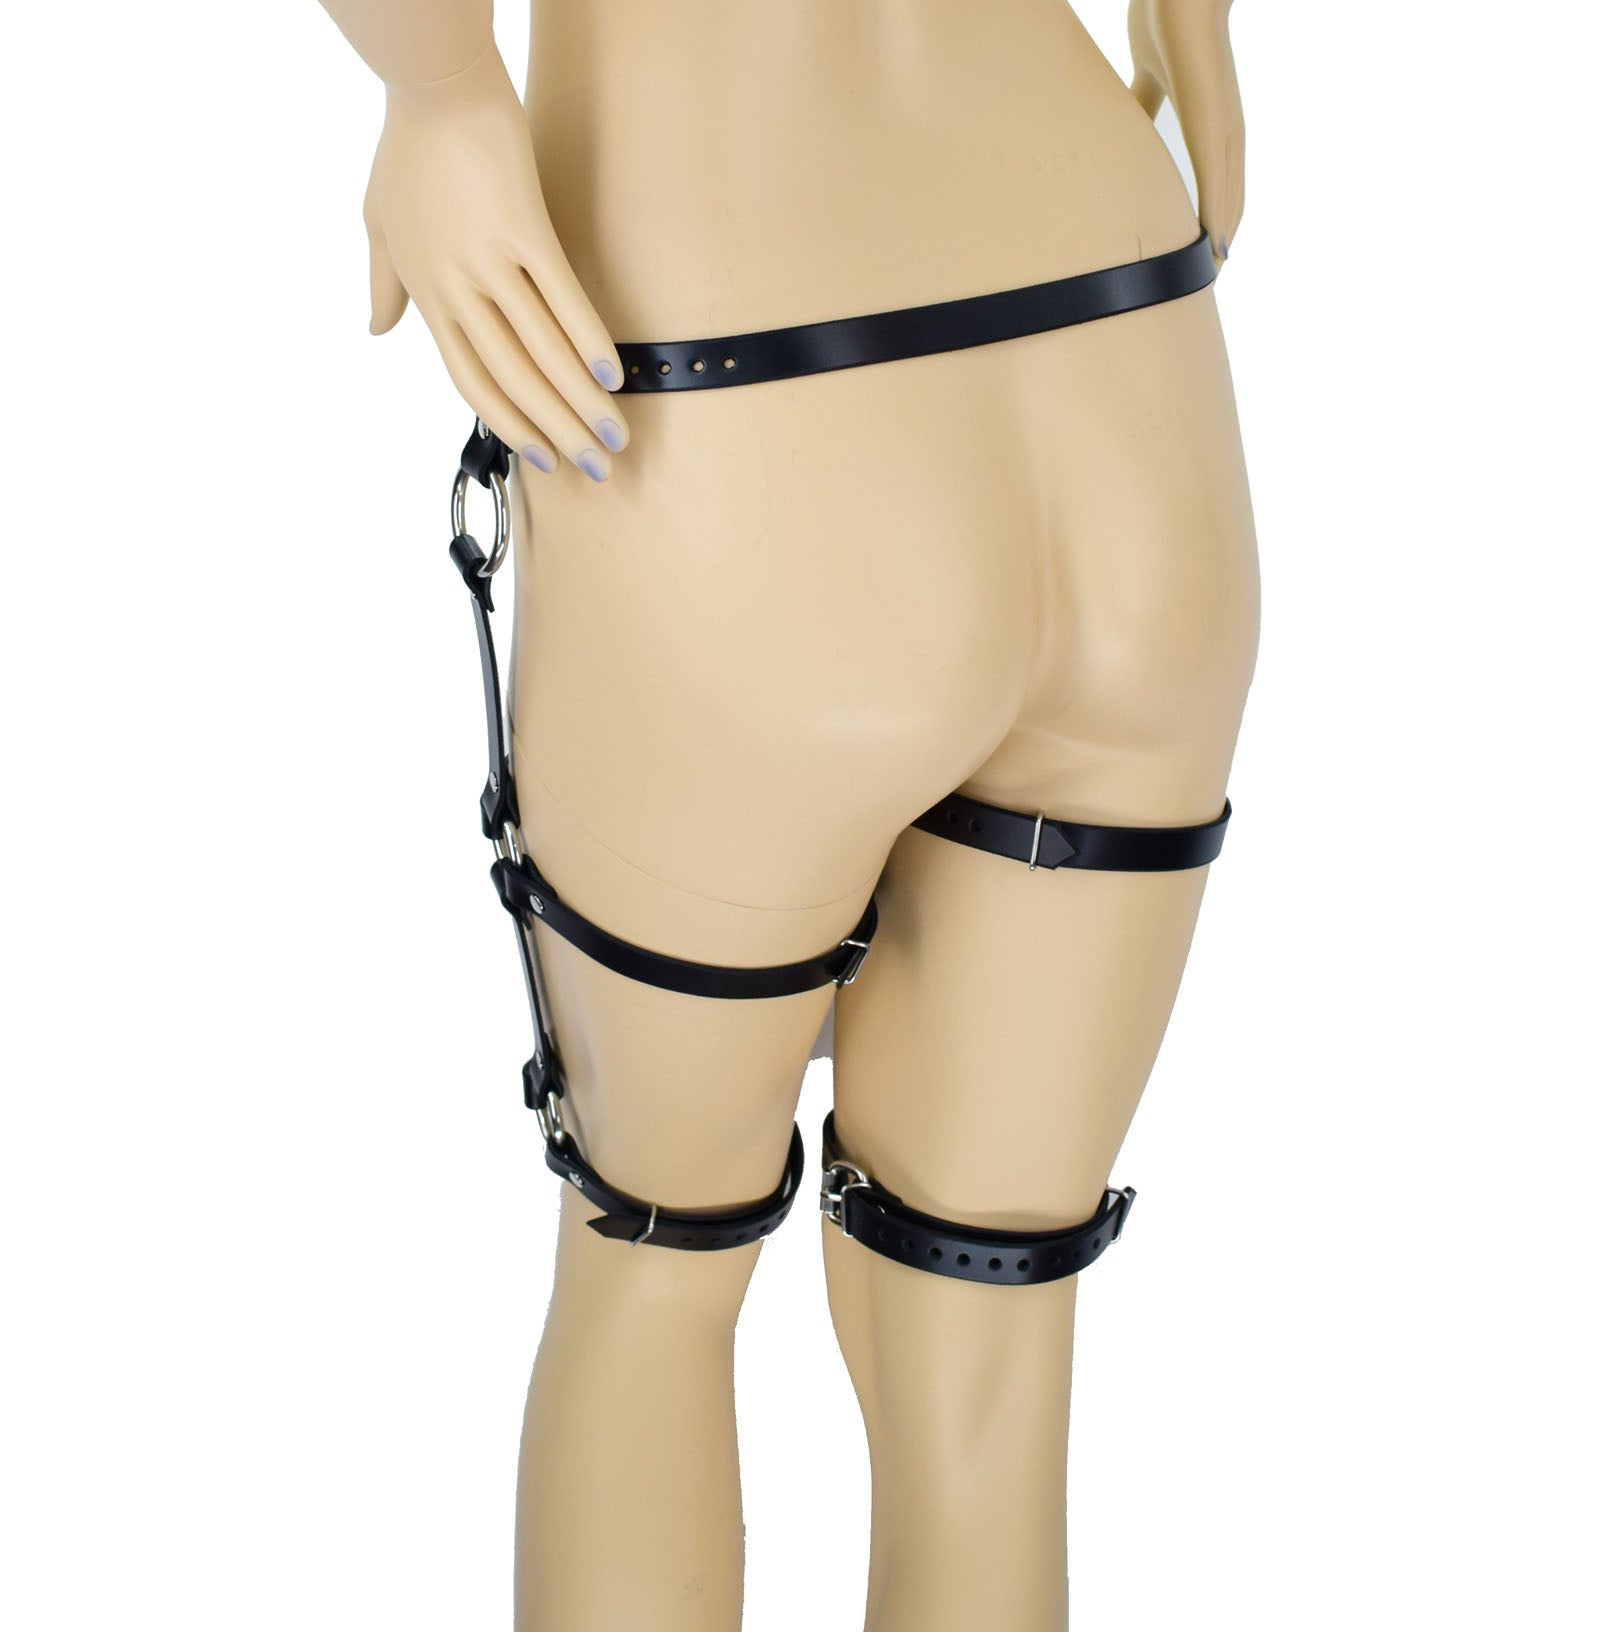 The Leather Garter Double Leg Harness on a mannequin, rear view.